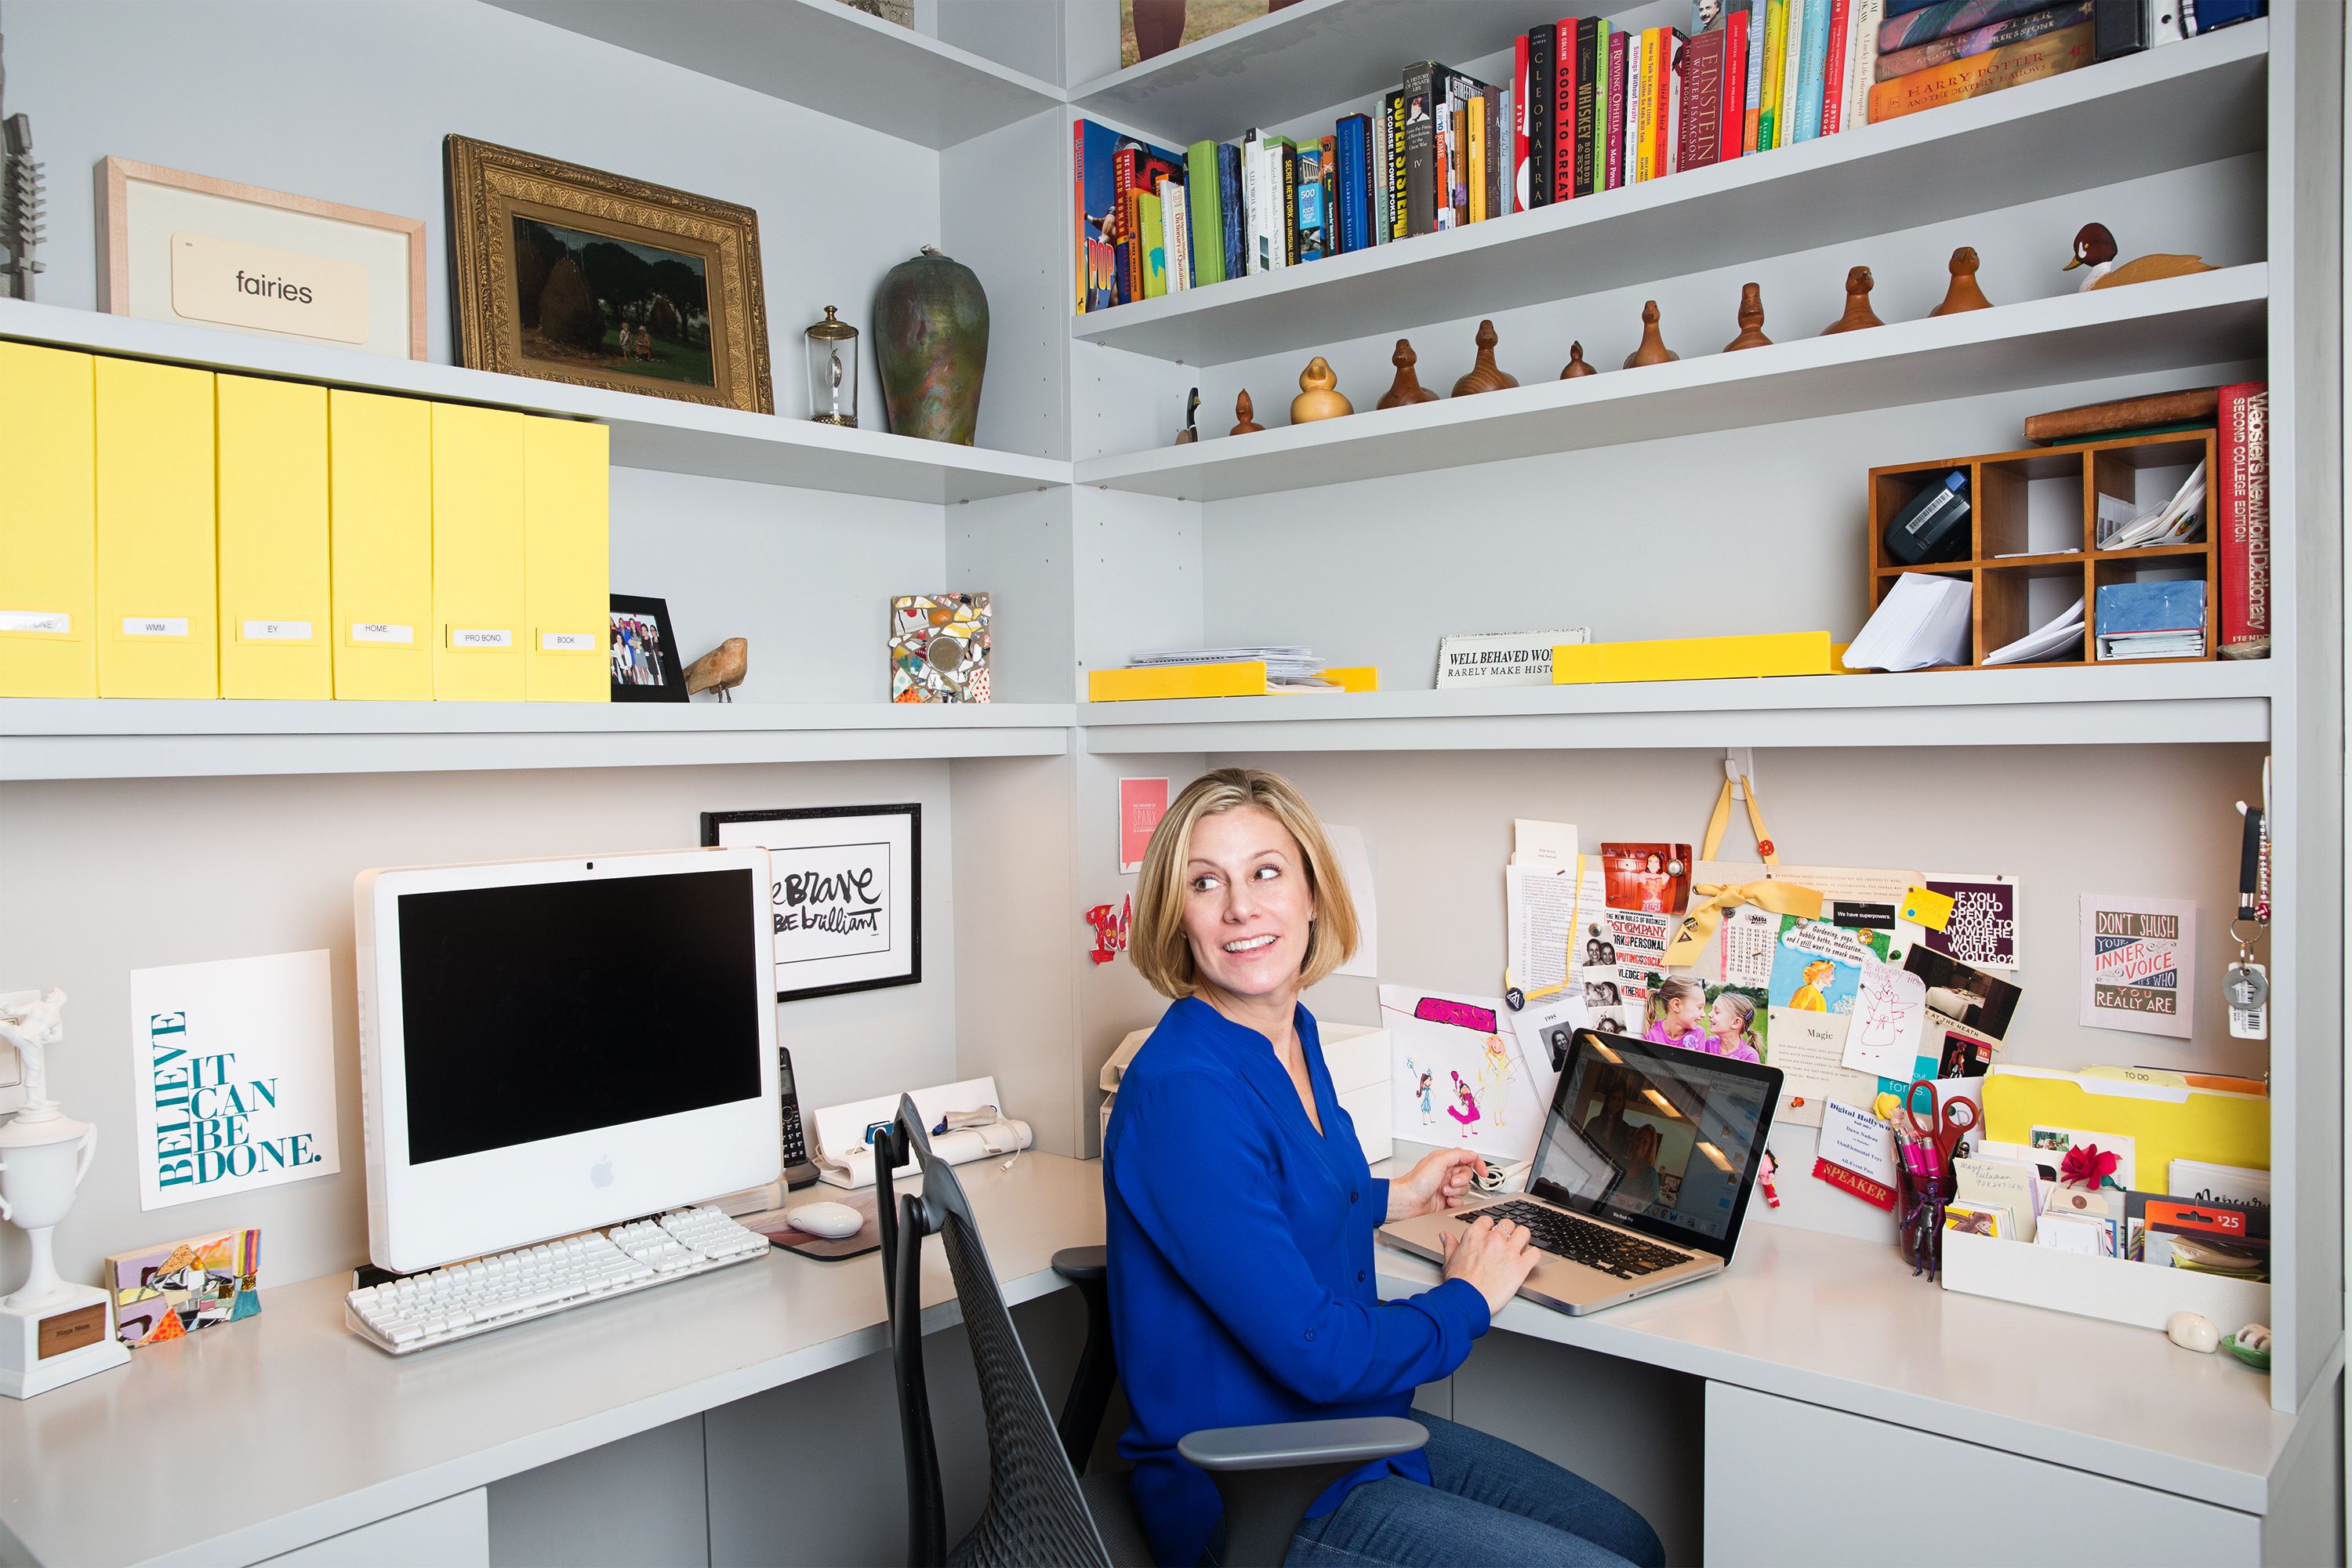 https://hips.hearstapps.com/goodhousekeeping/assets/16/01/1452282913-changed-life-to-get-organized-desk.jpg